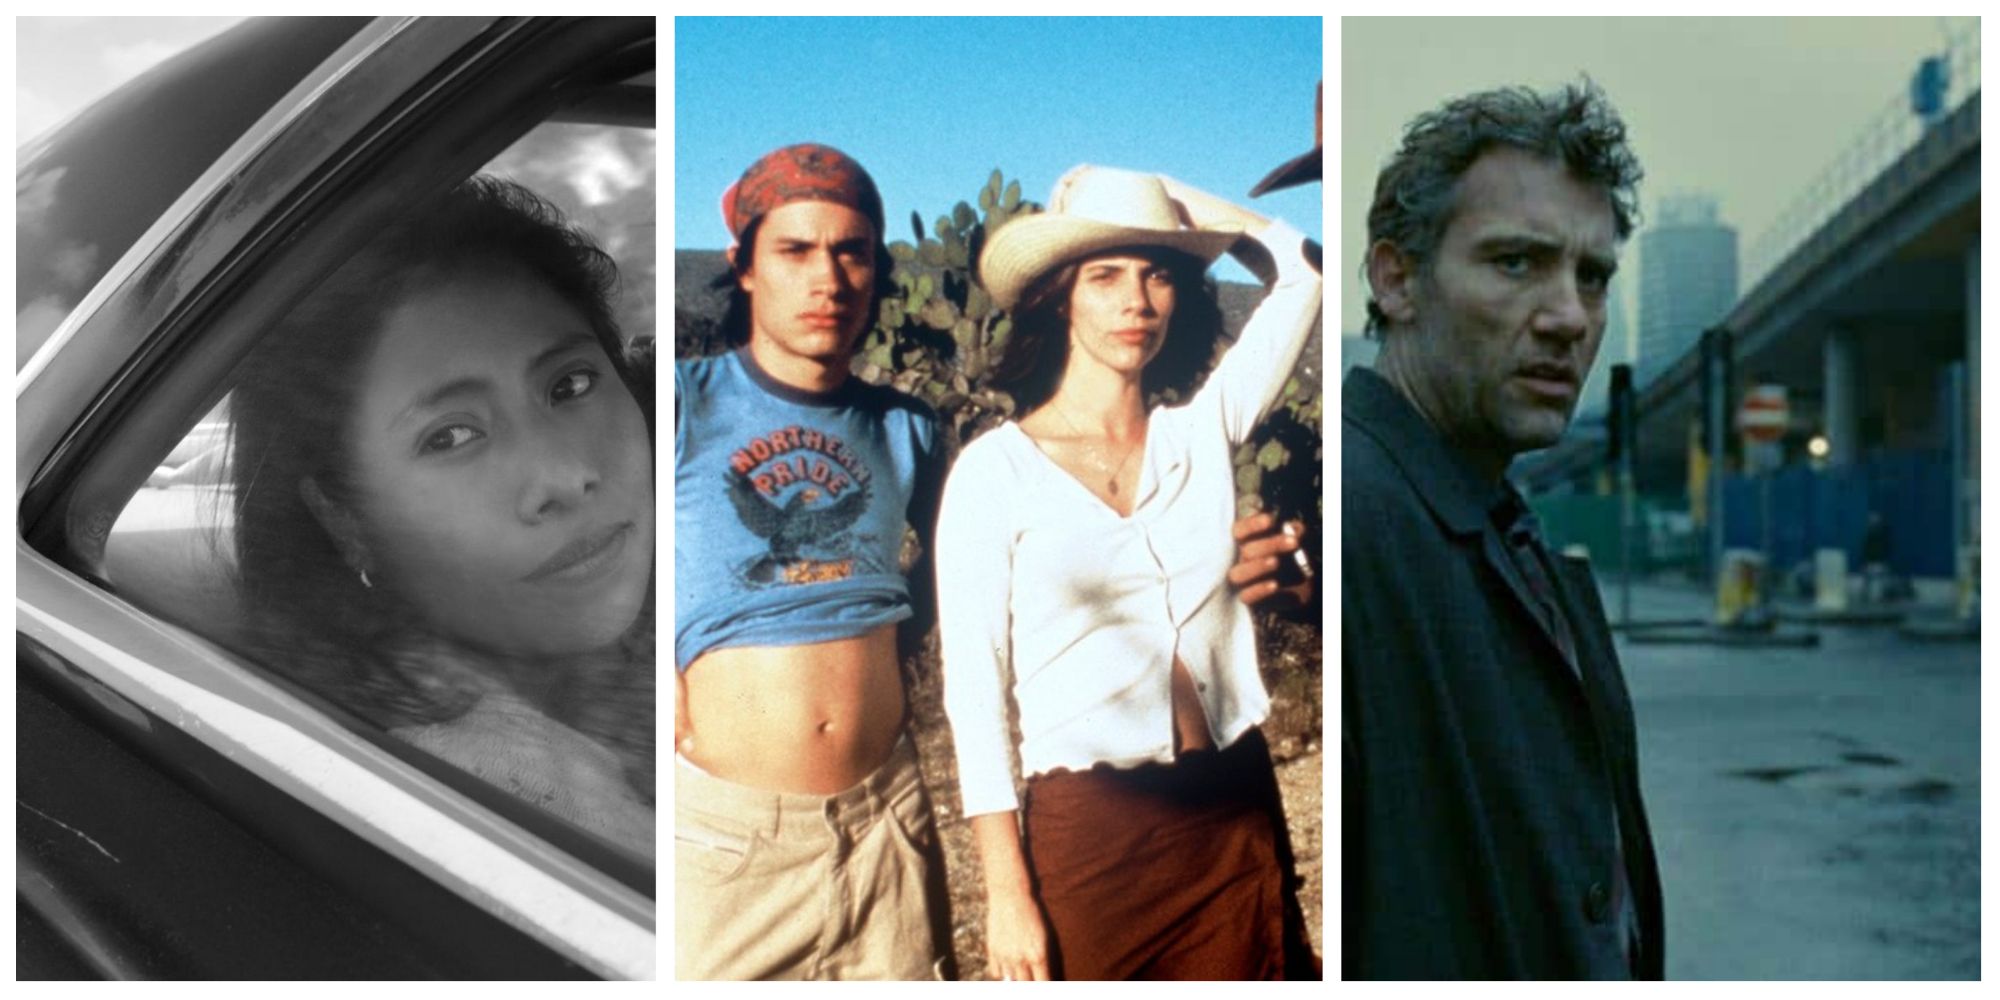 Collage featuring three Alfonso Cuaron films, Roma, Y Tu Mama Tambien, and Children of Men.